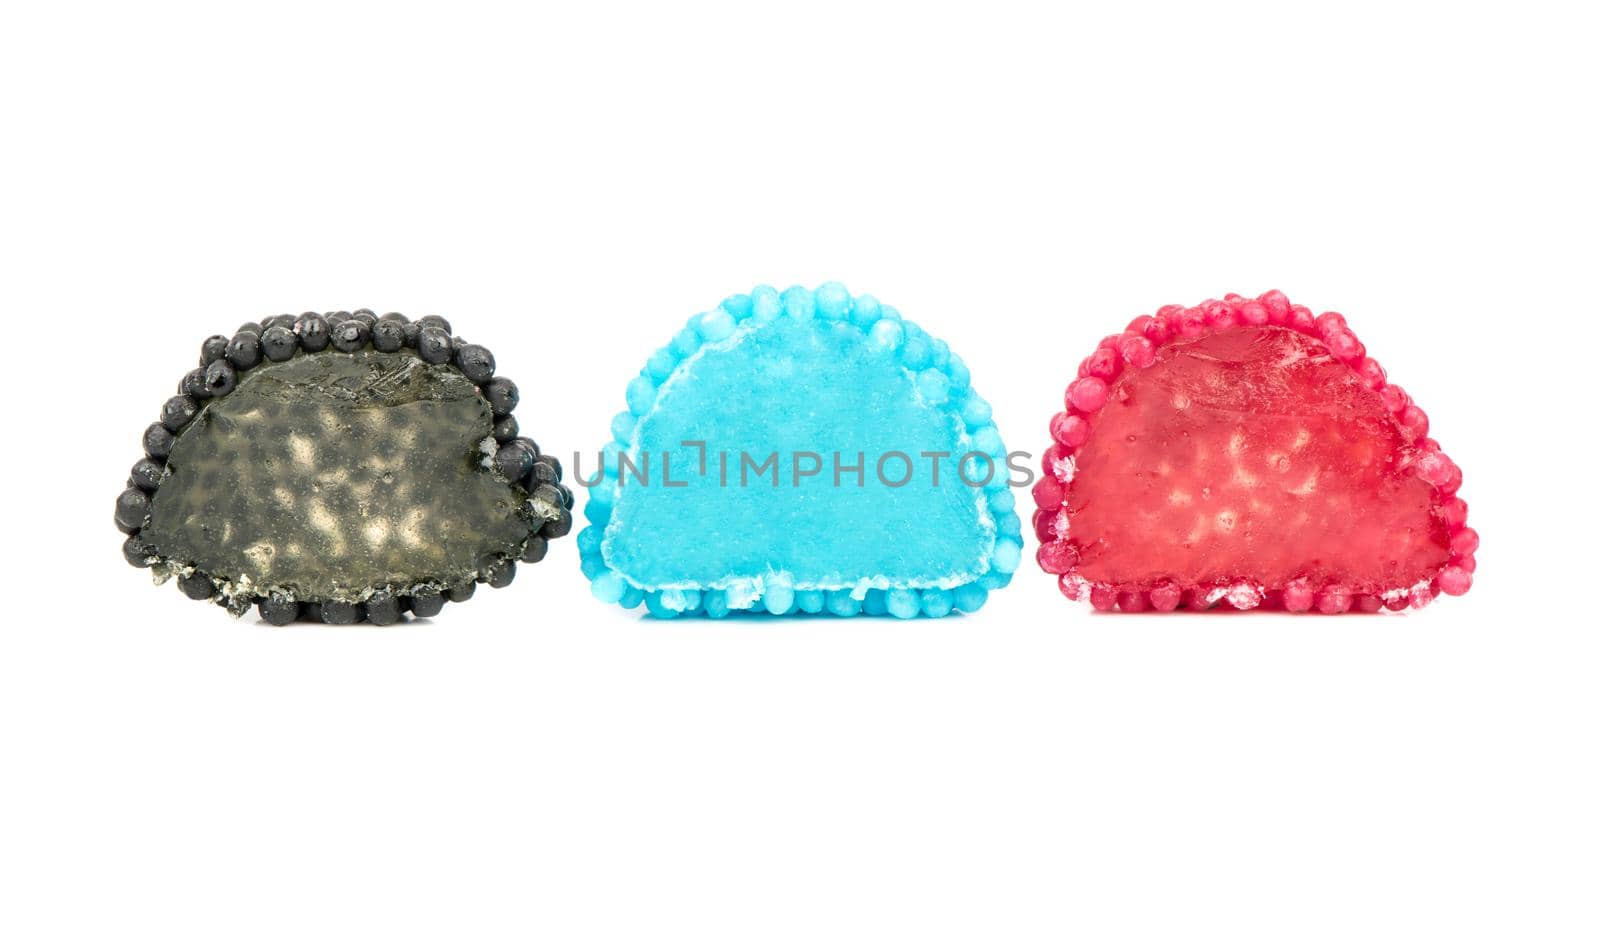 Three halves of multicolored berry jelly sweets on a white background